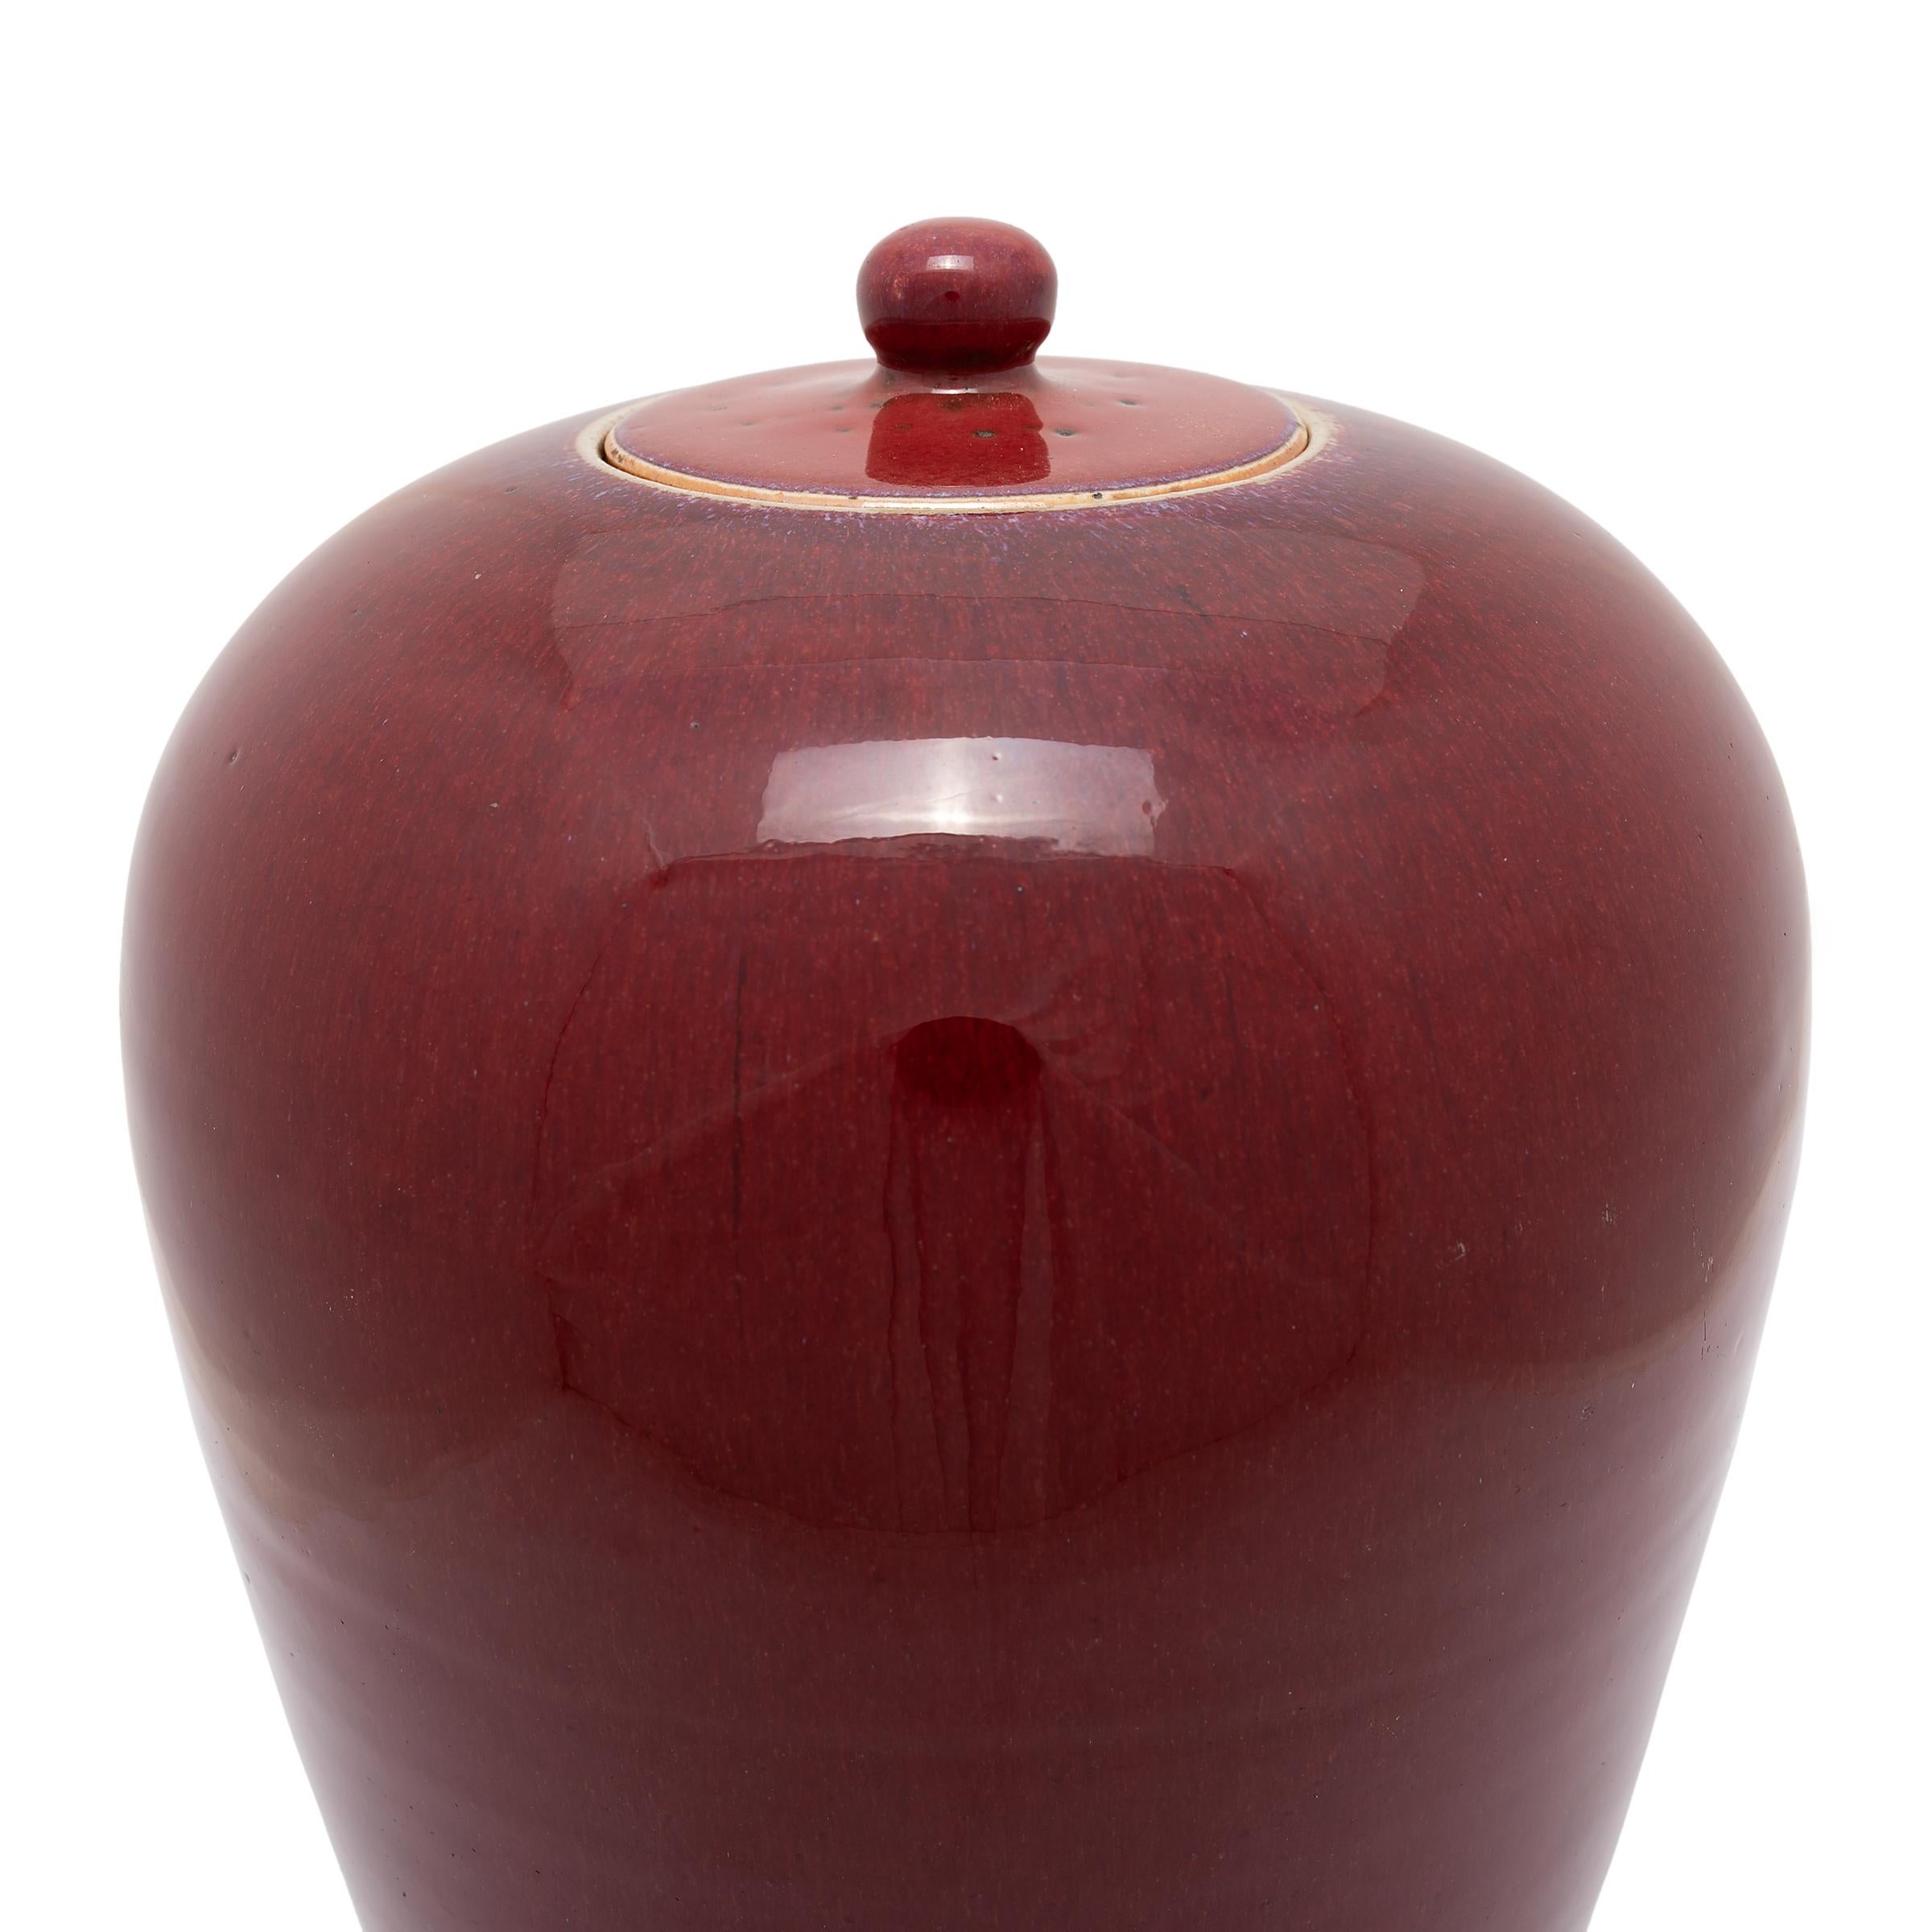 Qing Pair of Chinese Oxblood Ginger Jars, c. 1850